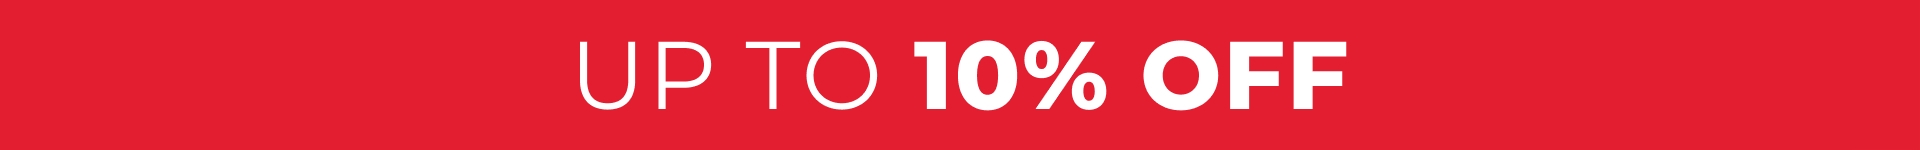 Up to 10 OFF